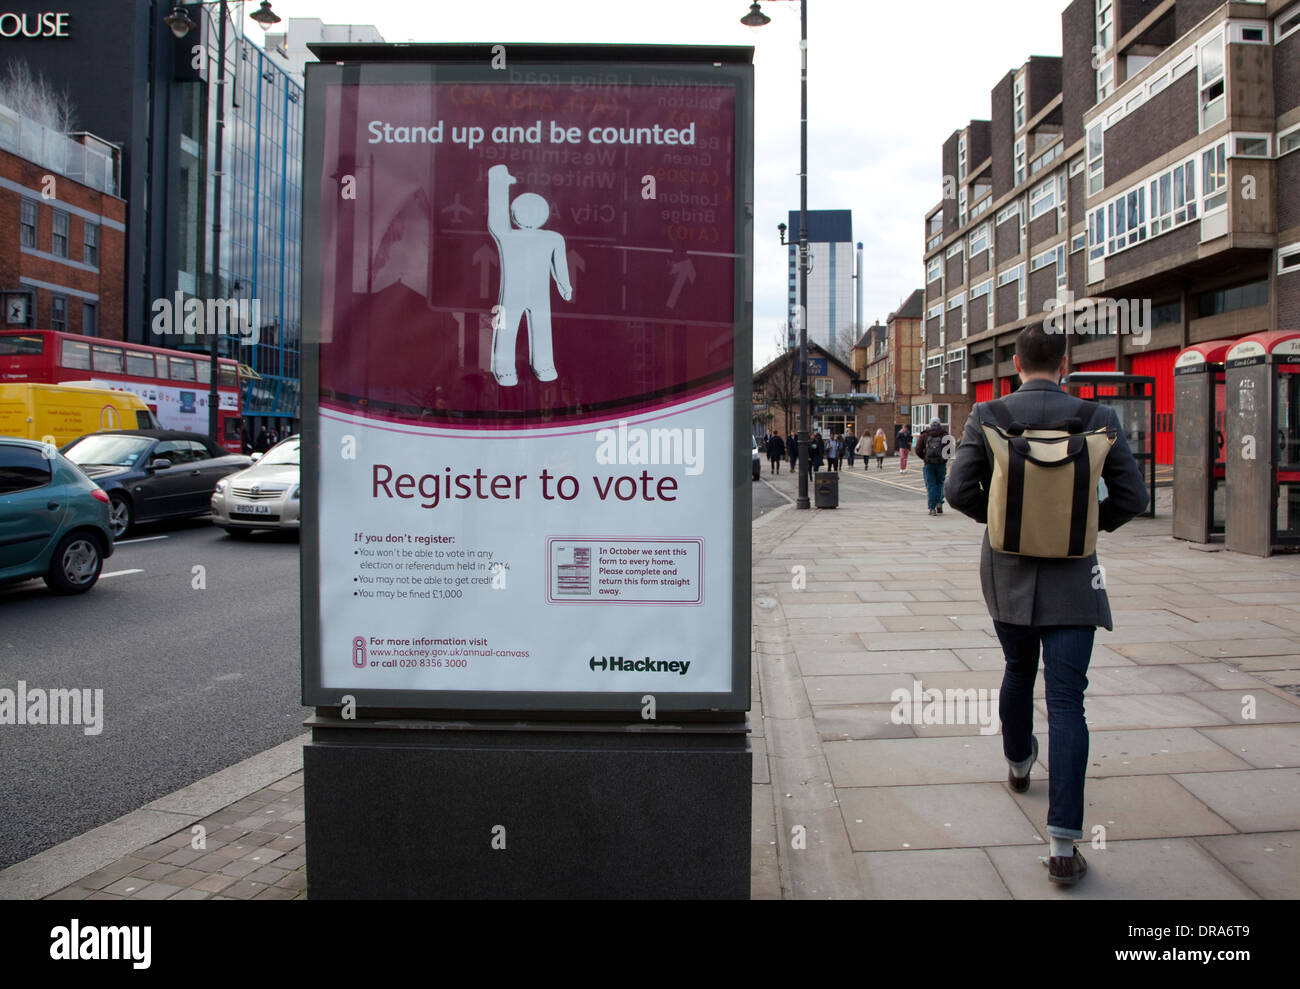 Register To Vote reminder poster in London street Stock Photo